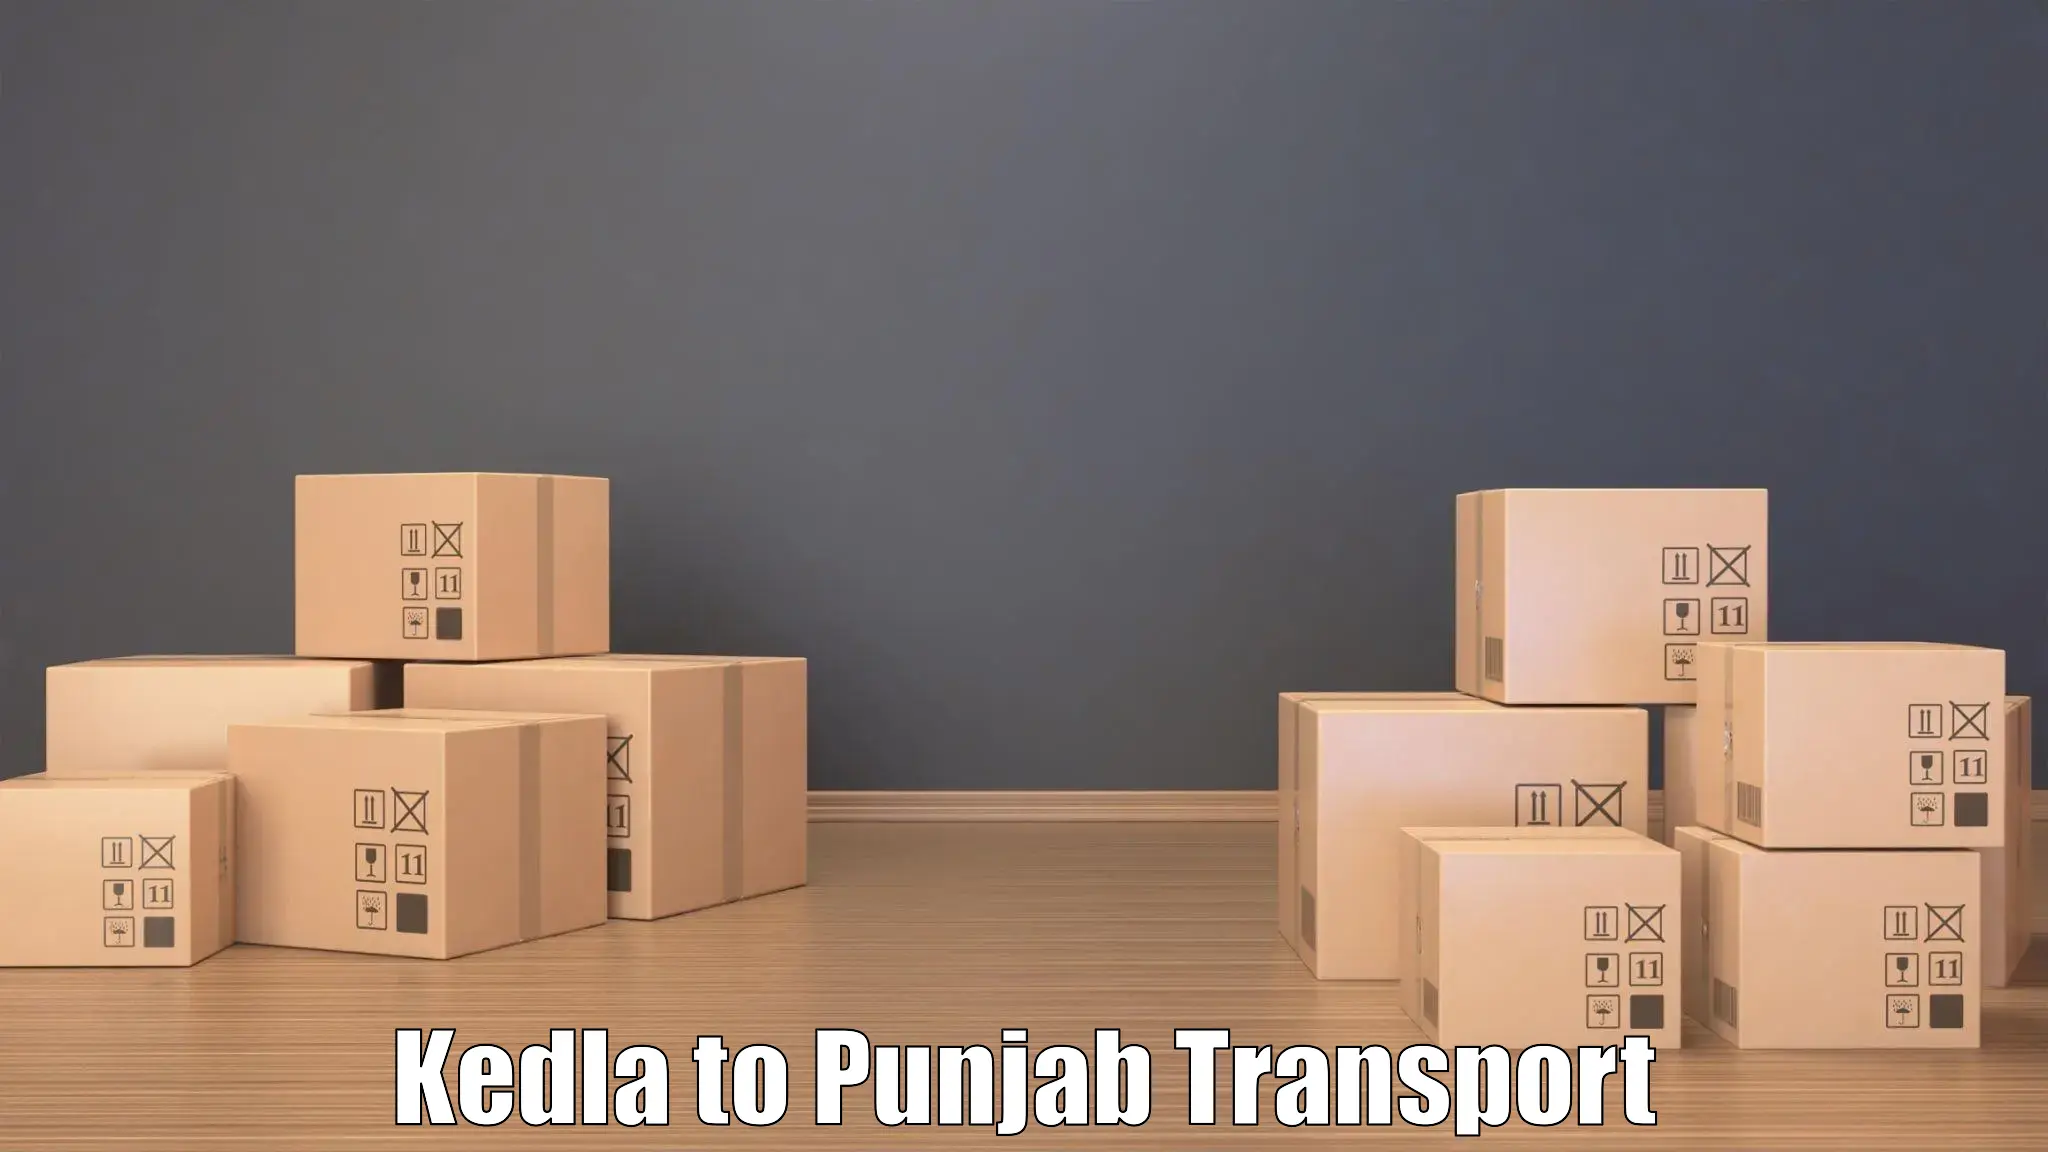 Container transport service Kedla to Pathankot